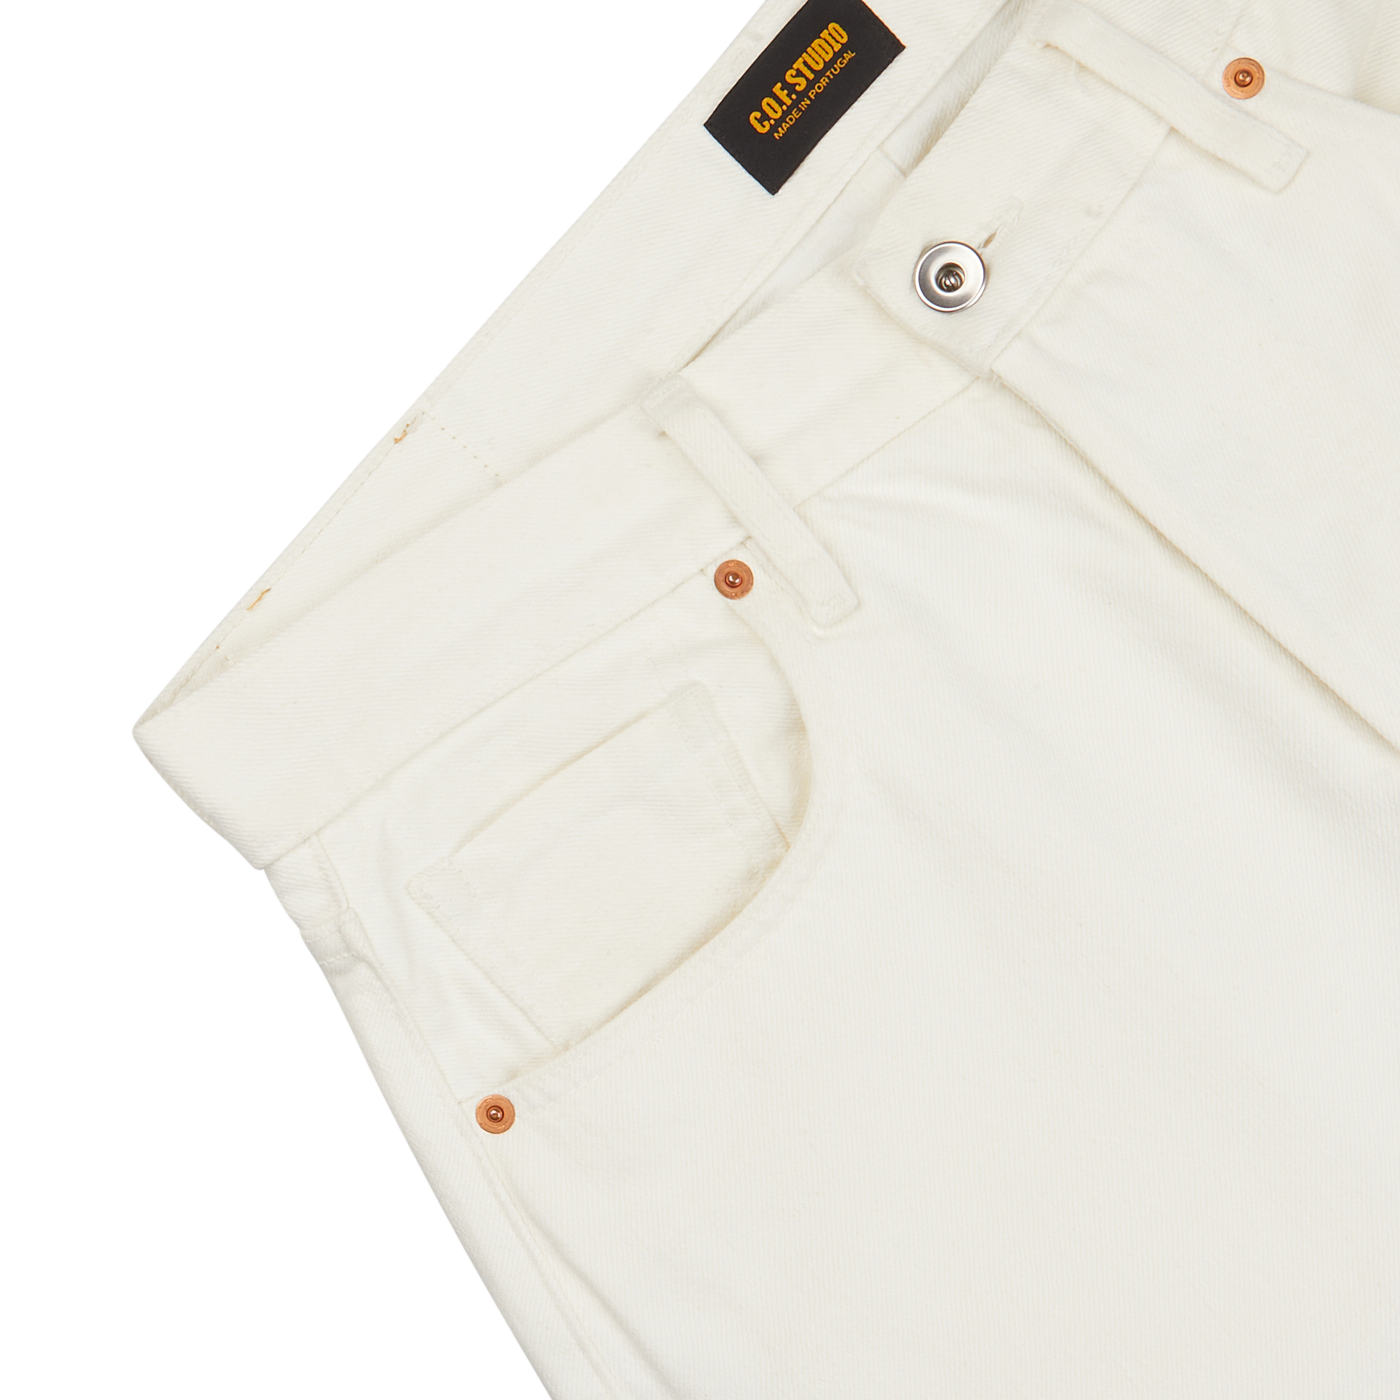 Close-up of white, organic Ecru Stone Washed Kuroki Cotton M5 jeans featuring a pocket and copper rivets, with a black 'C.O.F Studio' brand label visible.